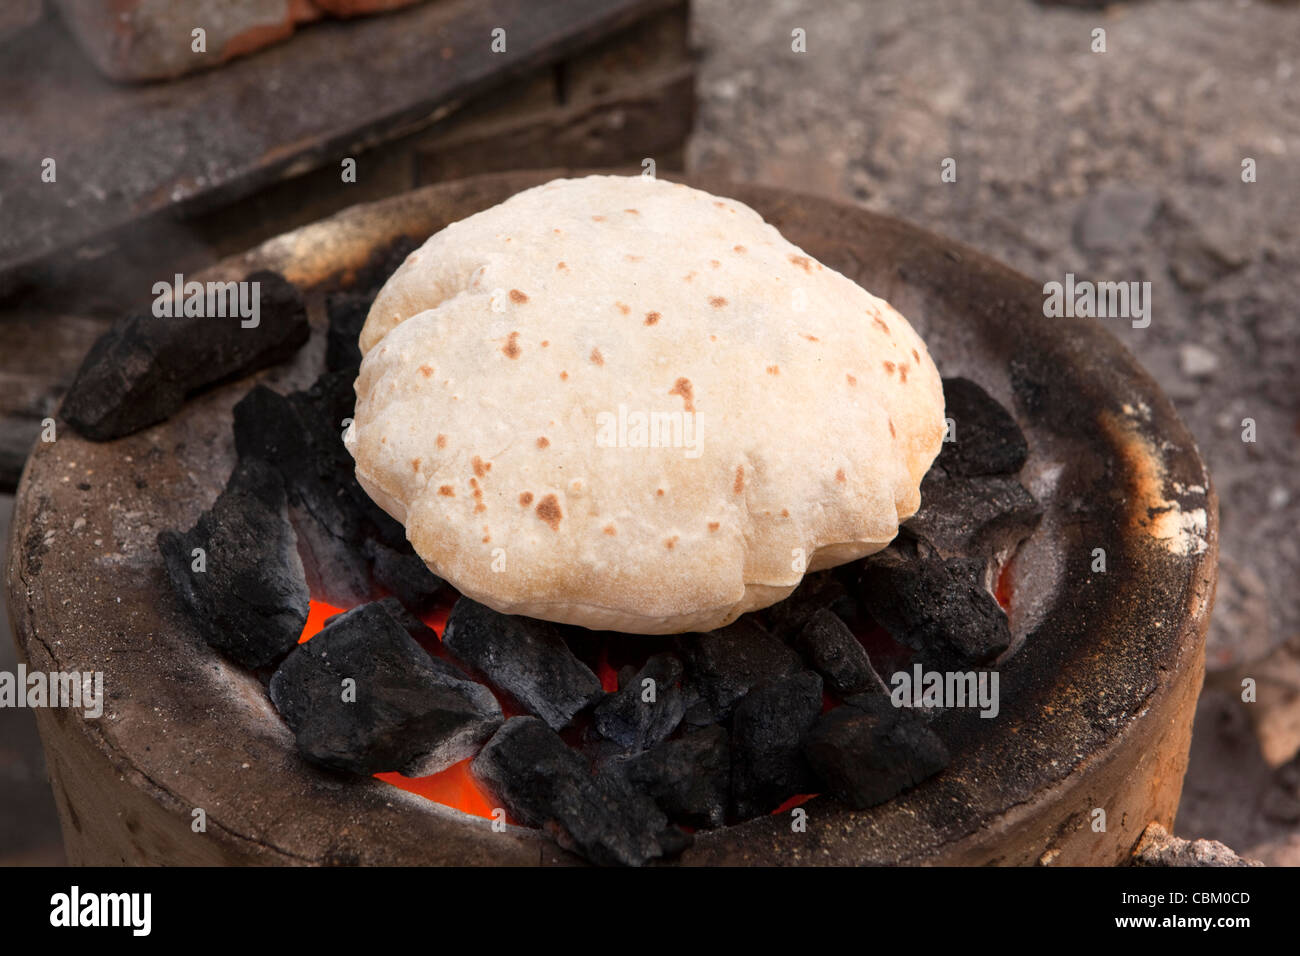 India, West Bengal, Kolkata, Esplanade, cooking, roti being puffed up in fire coals at bus station food stall Stock Photo